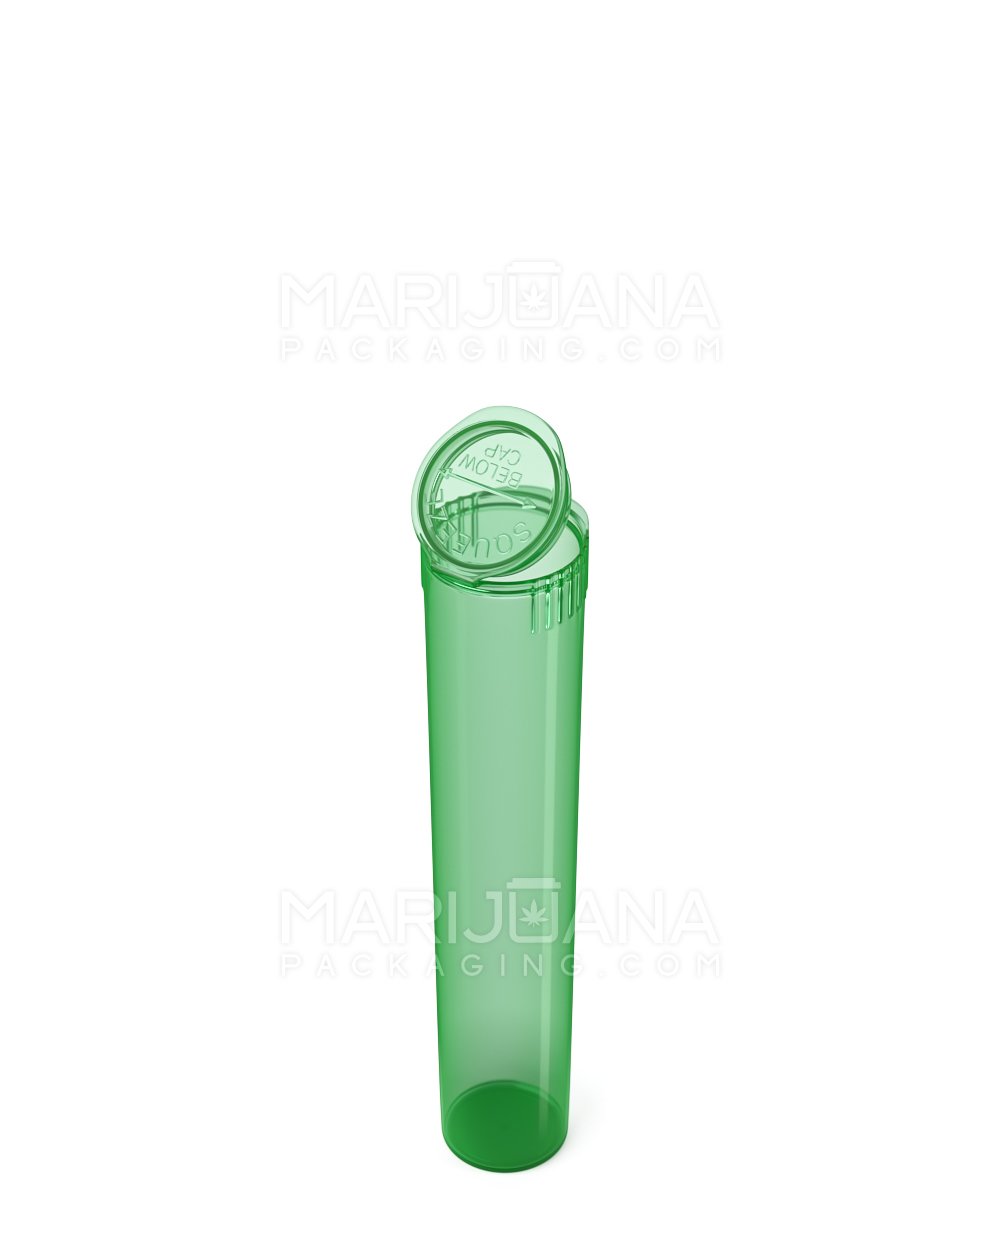 Child Resistant | Pop Top Translucent Plastic Pre-Roll Tubes | 95mm - Green - 1000 Count - 3